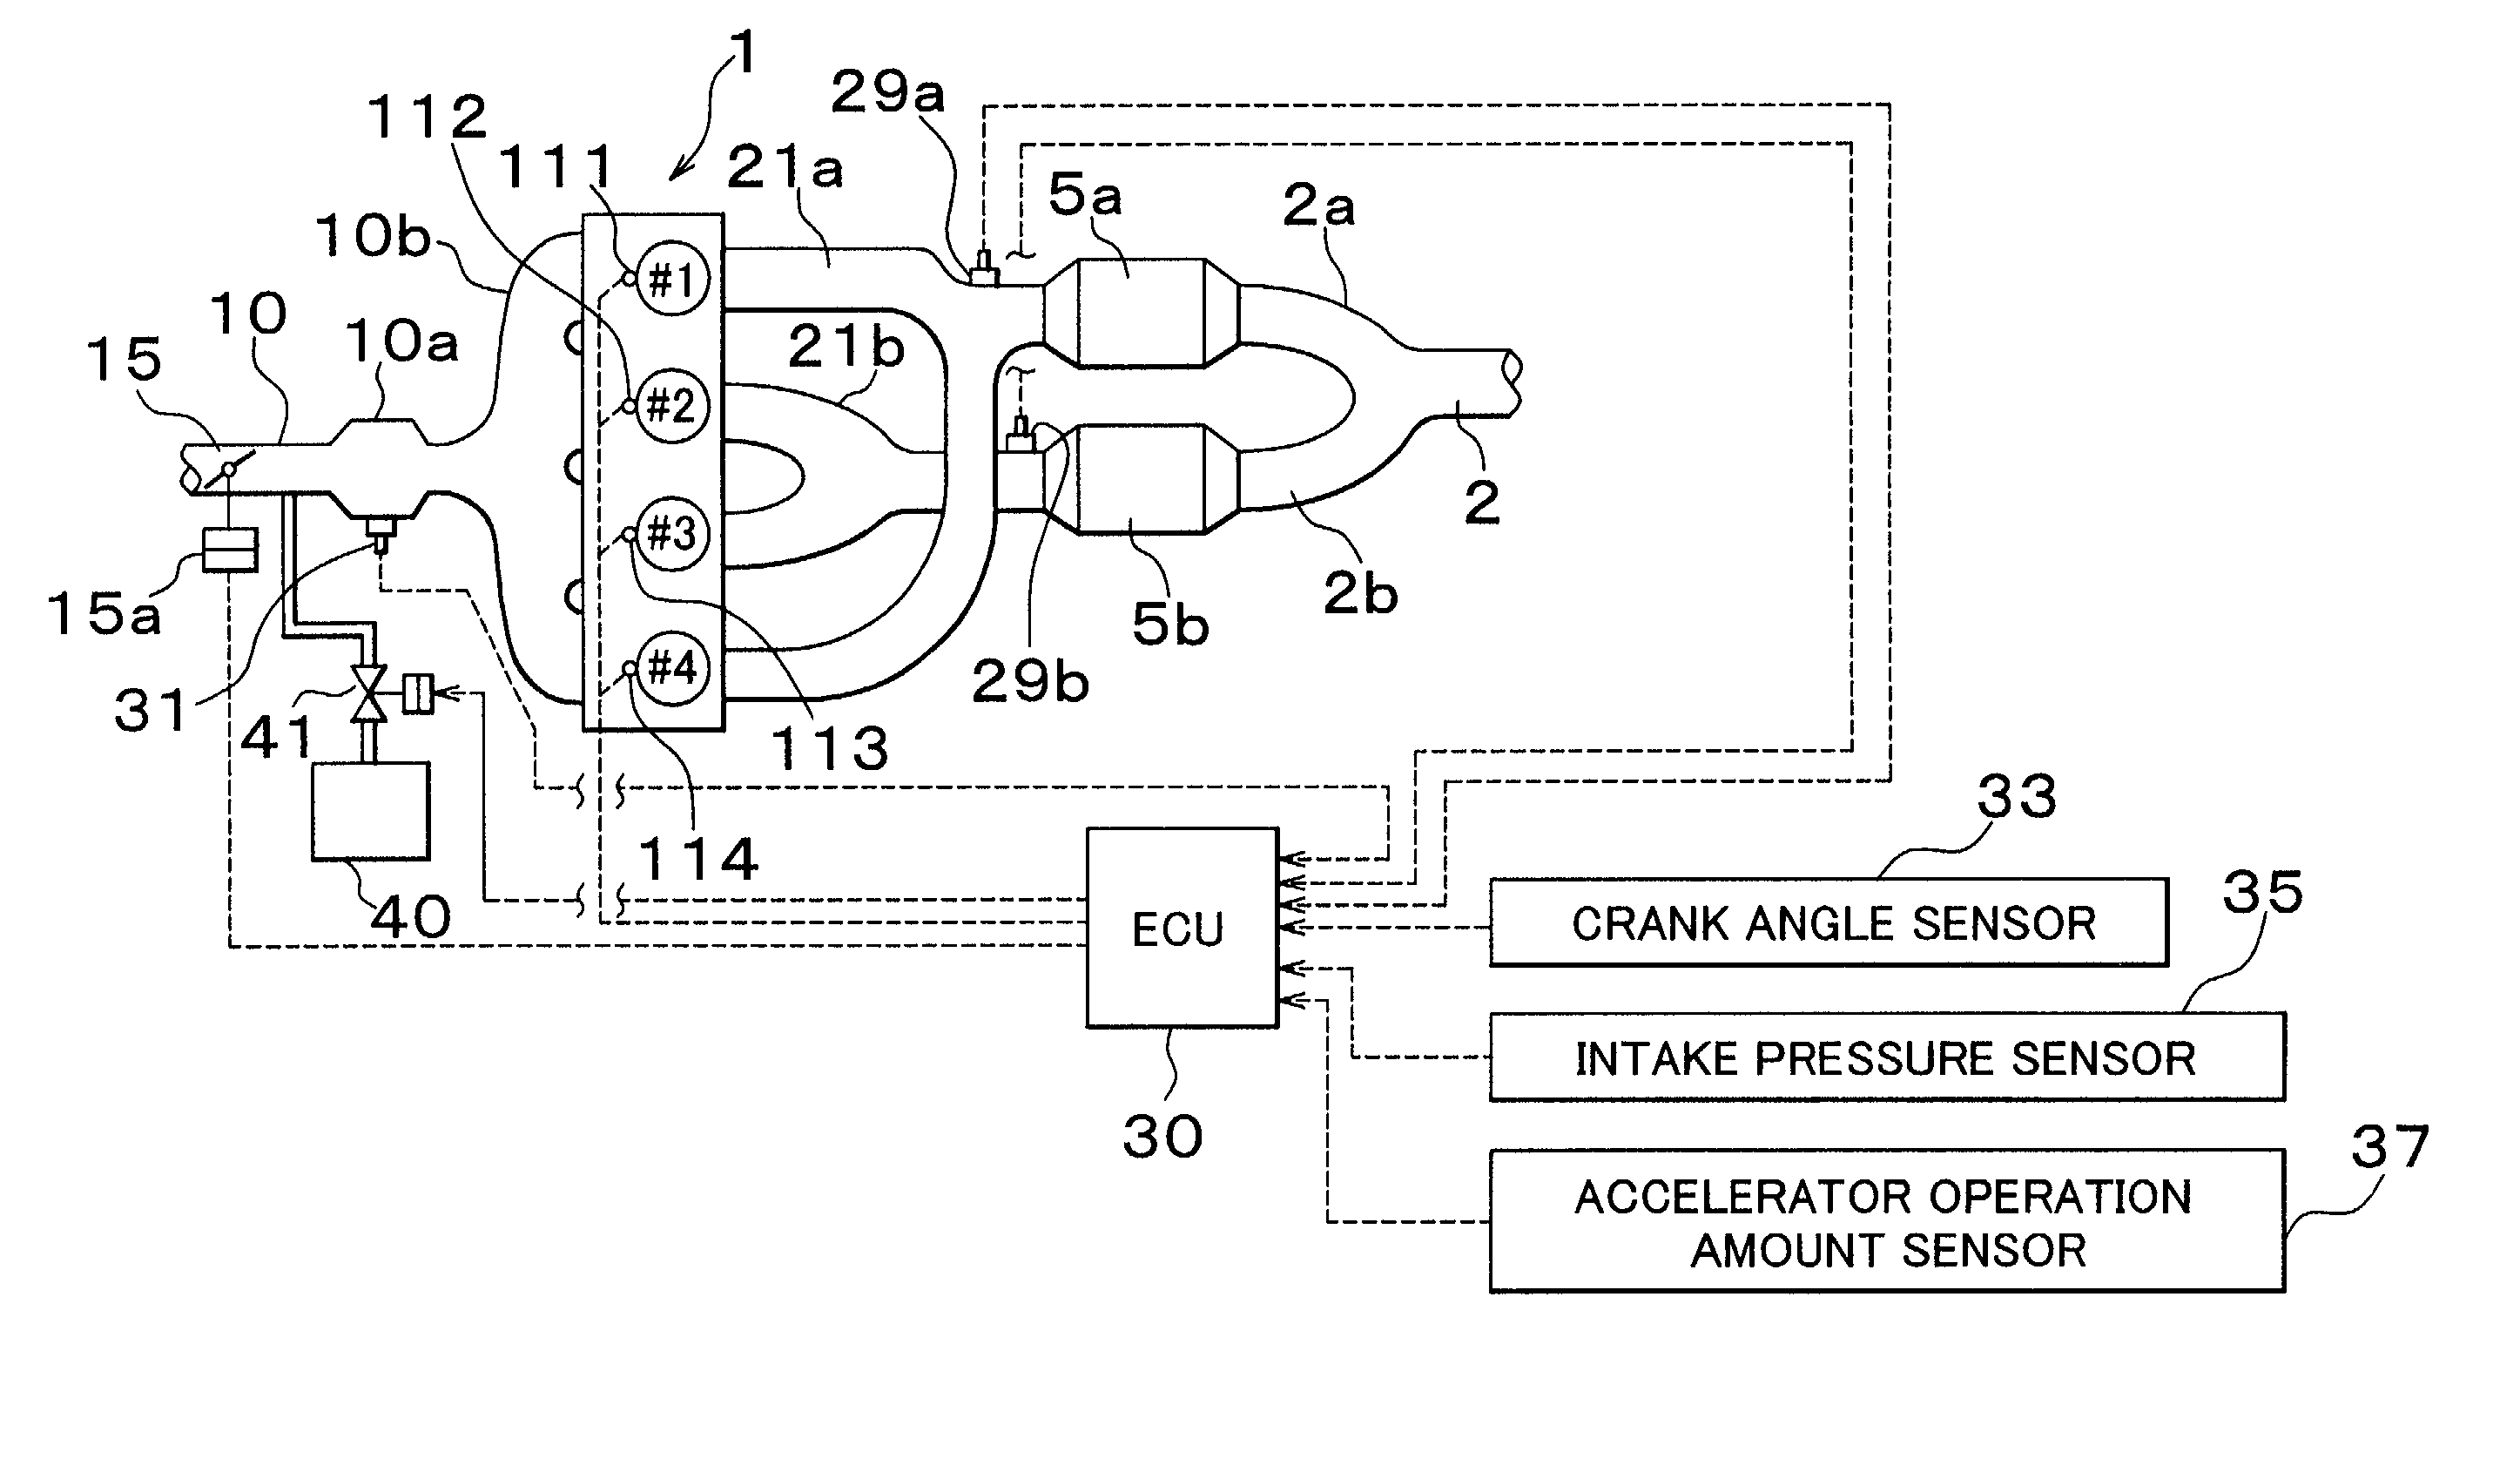 Fuel injection control apparatus and method of direct fuel injection-type spark ignition engine